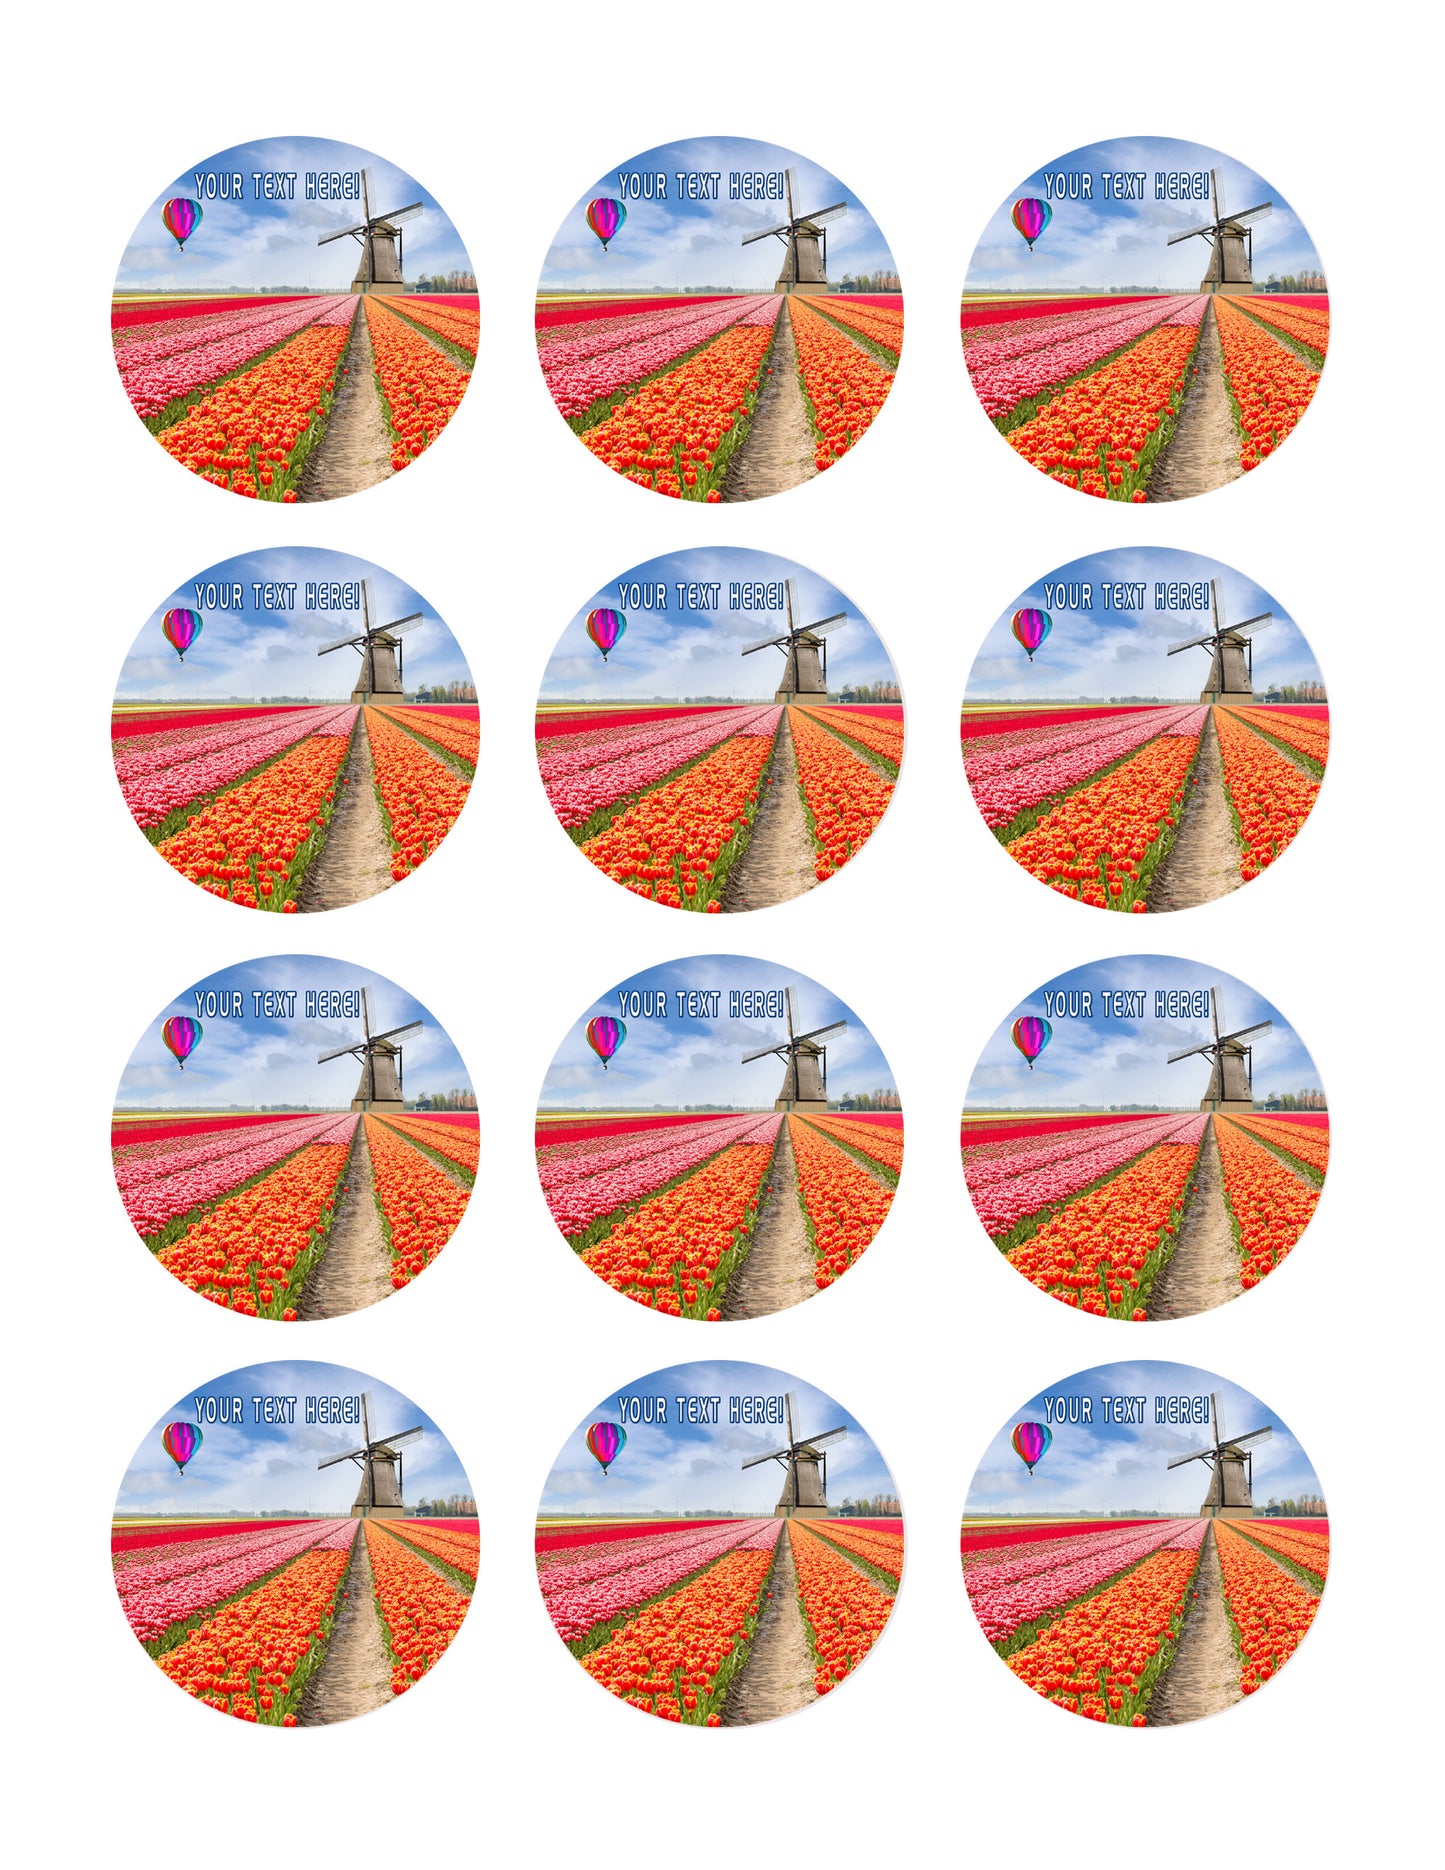 Landscape of Netherlands of Tulips with Hot Air Balloon - Edible Cake Topper, Cupcake Toppers, Strips